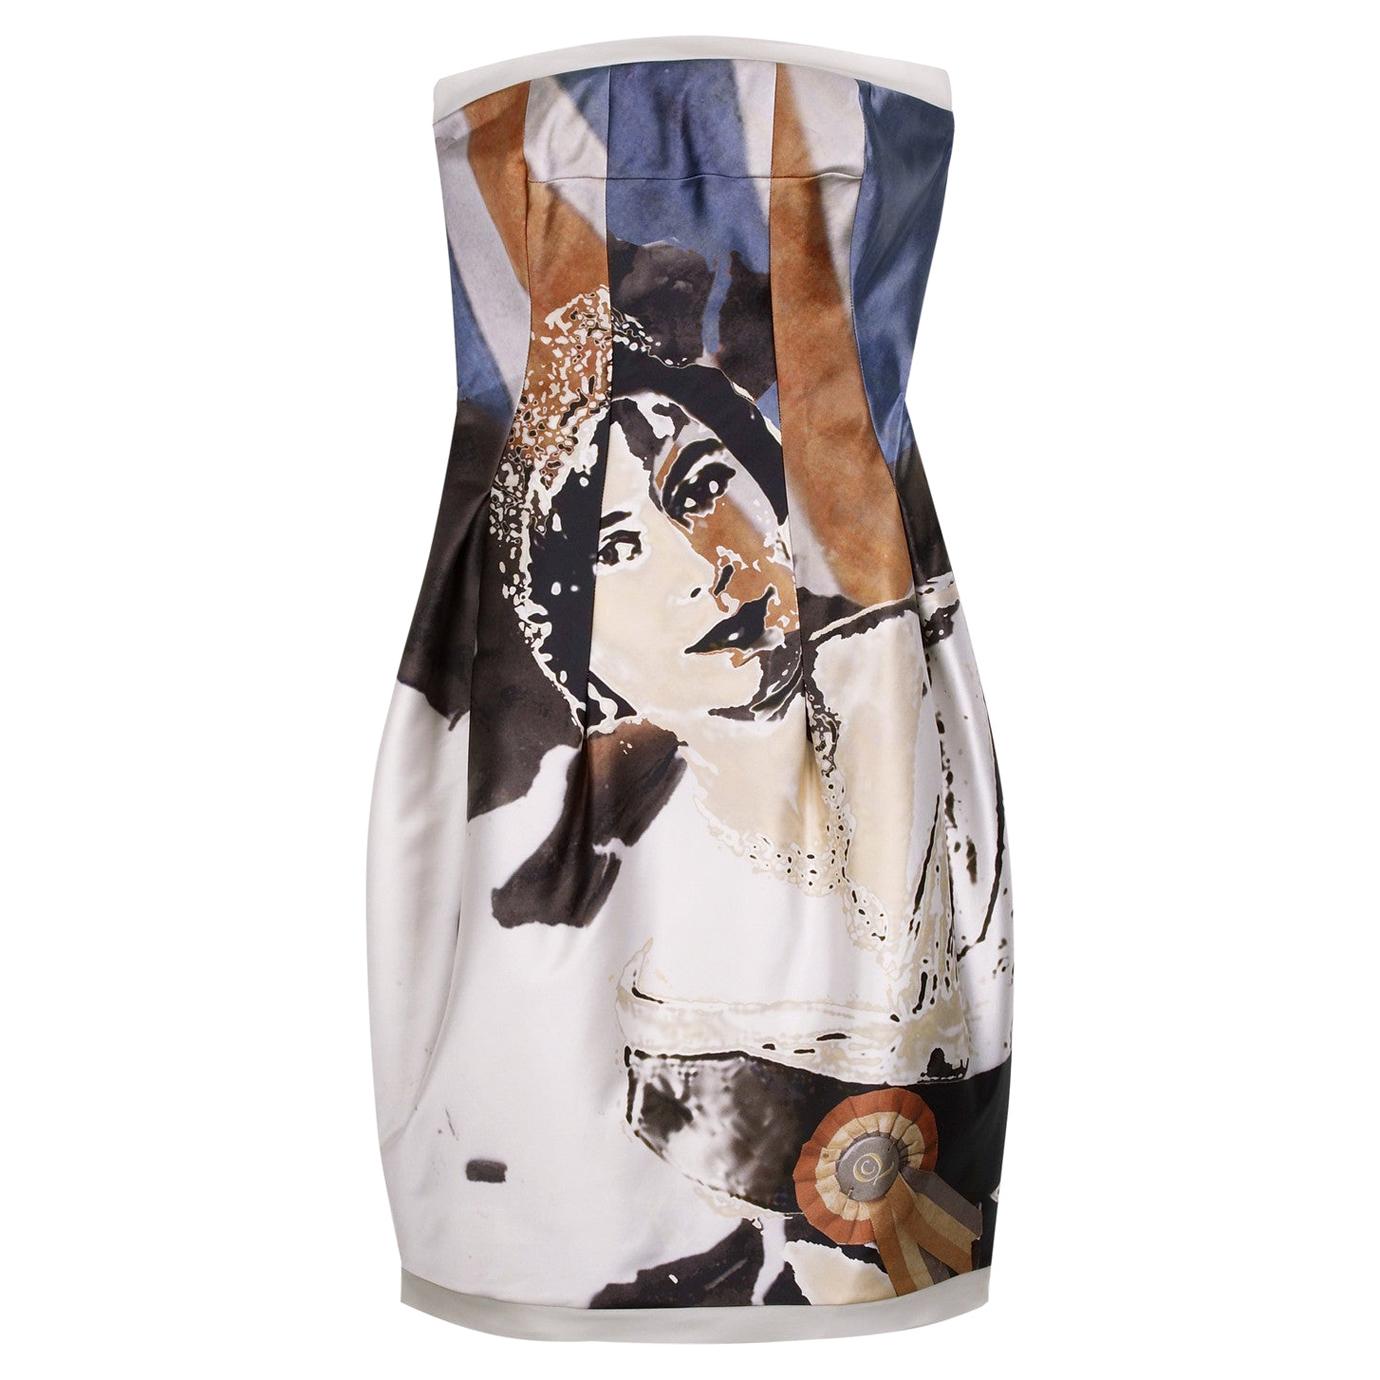 2008 ICONIC ALEXANDER MCQUEEN 'GOD SAVE THE QUEEN' DRESS Size 42